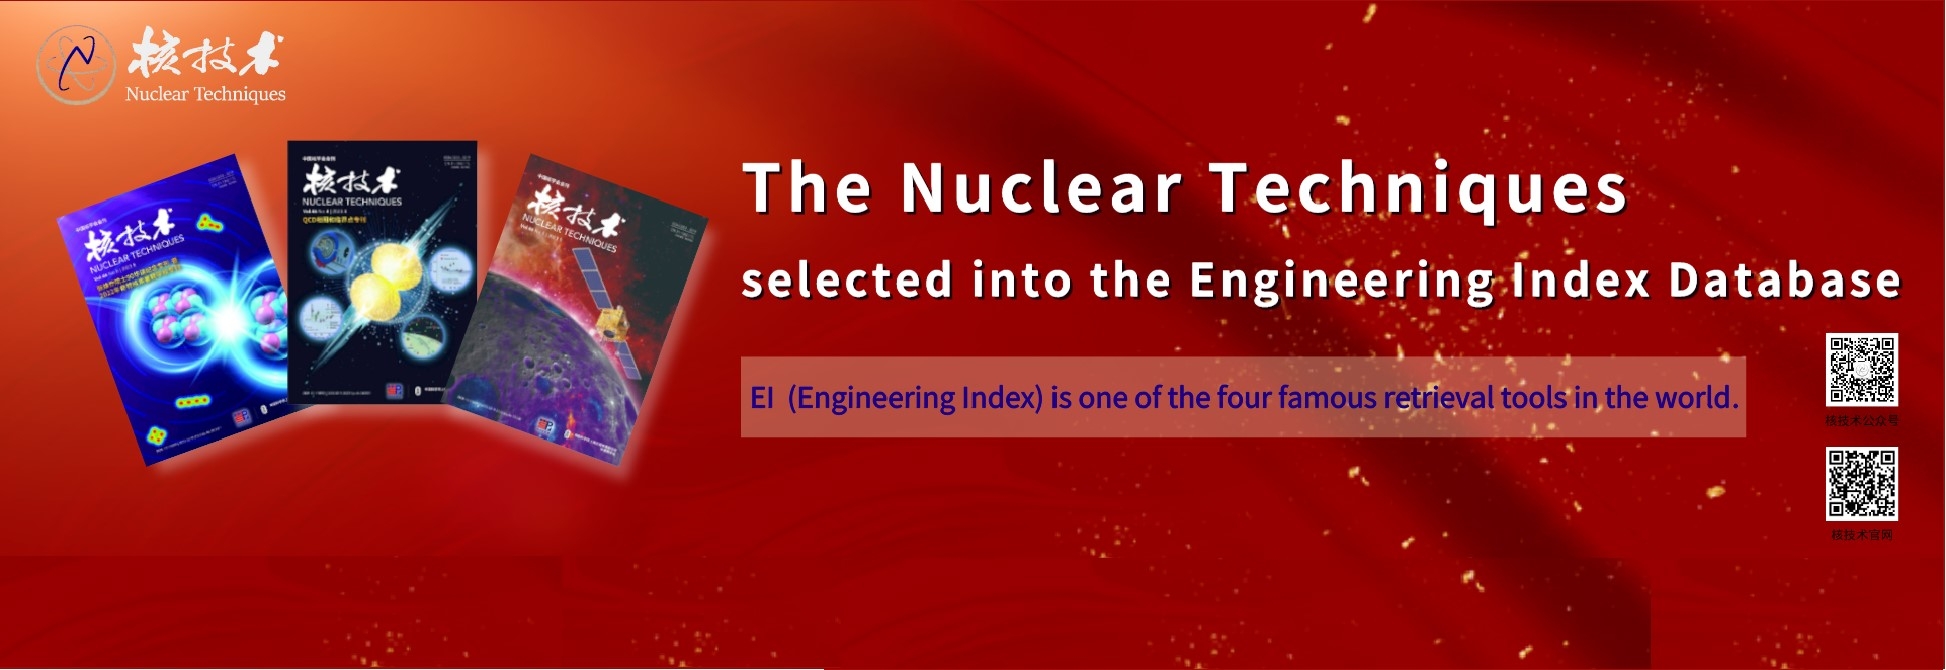 <b>The Nuclear Techniques selected into the Engineering Index Database</b>